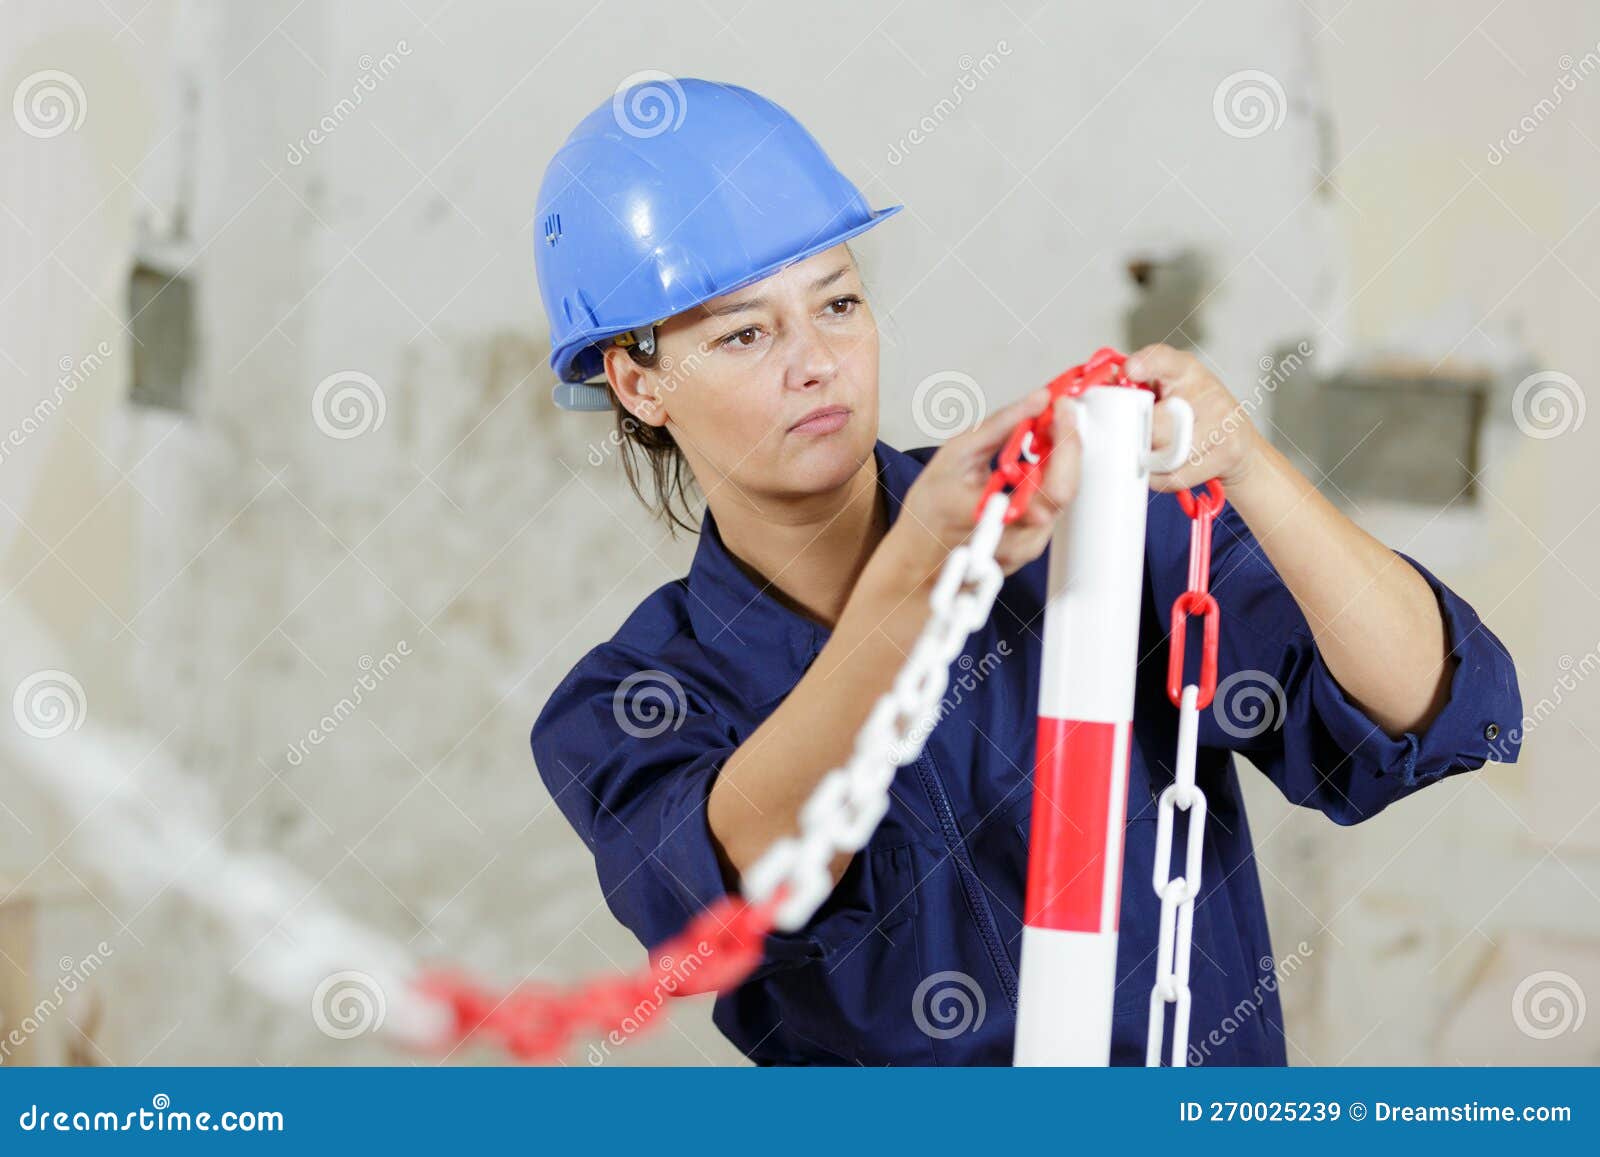 concentrated civil engineer at work